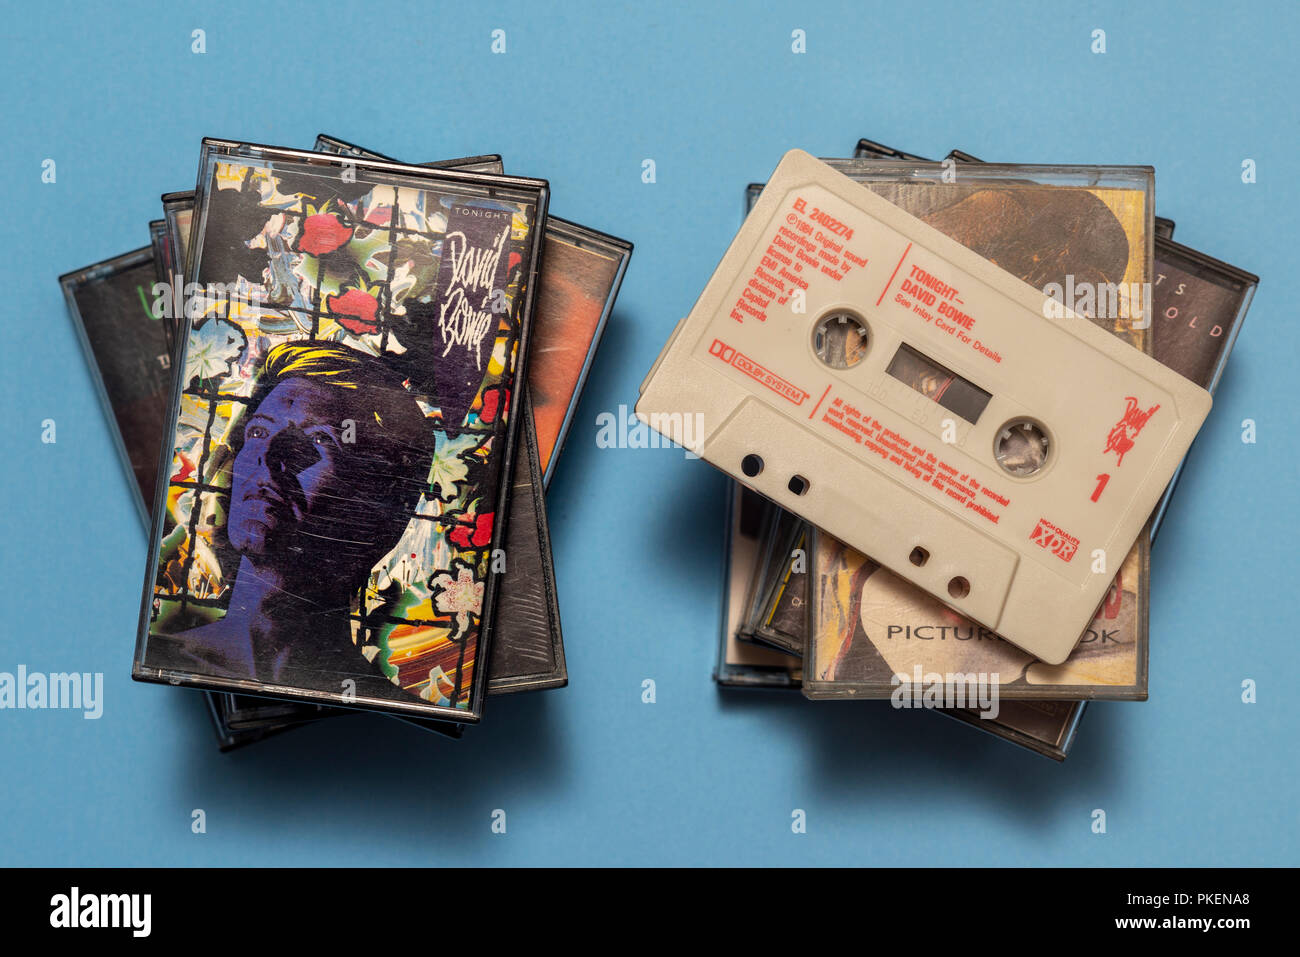 Compact audio cassette of David Bowie, Tonight album with art work. Stock Photo